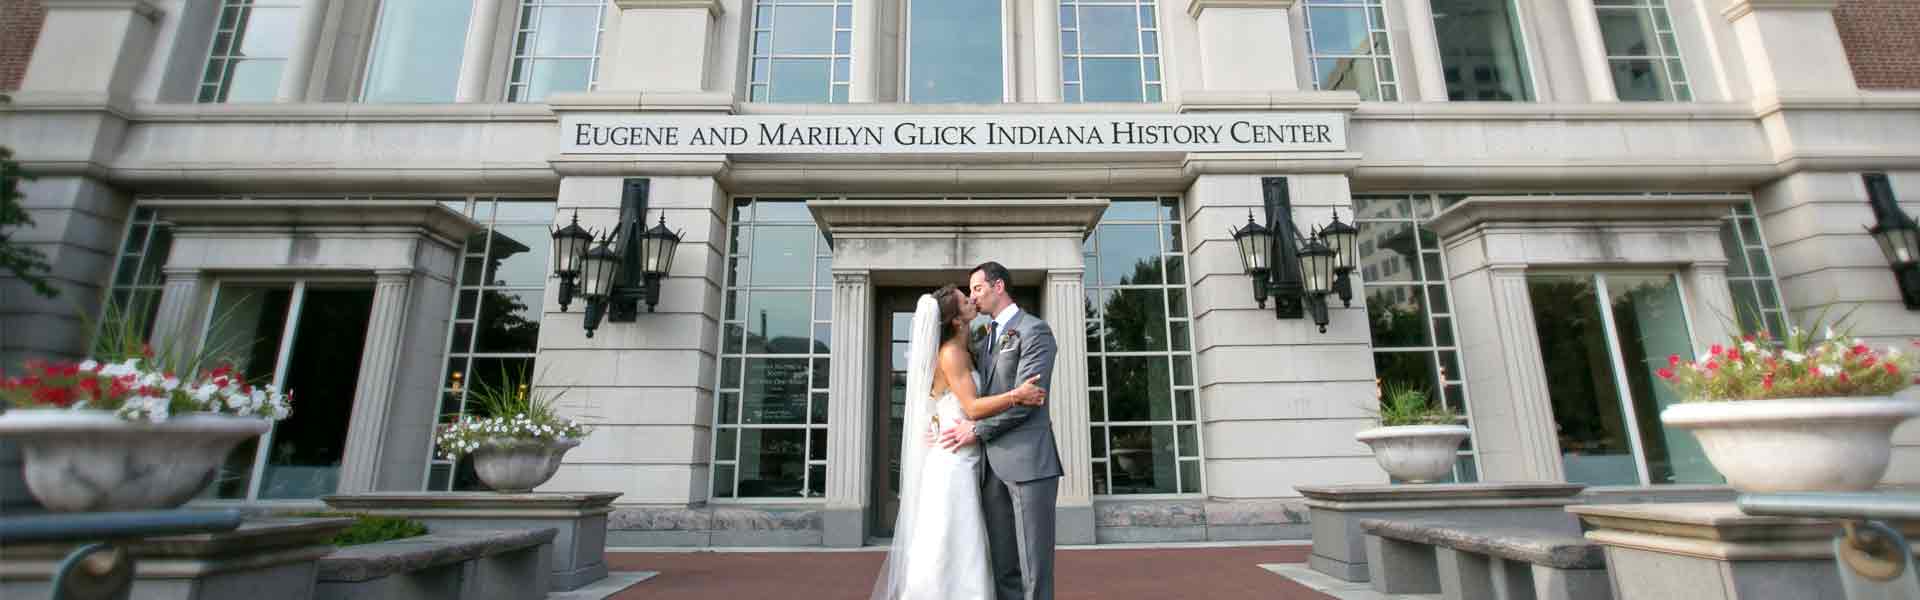 Bride and Groom kissing in front of History Center building.